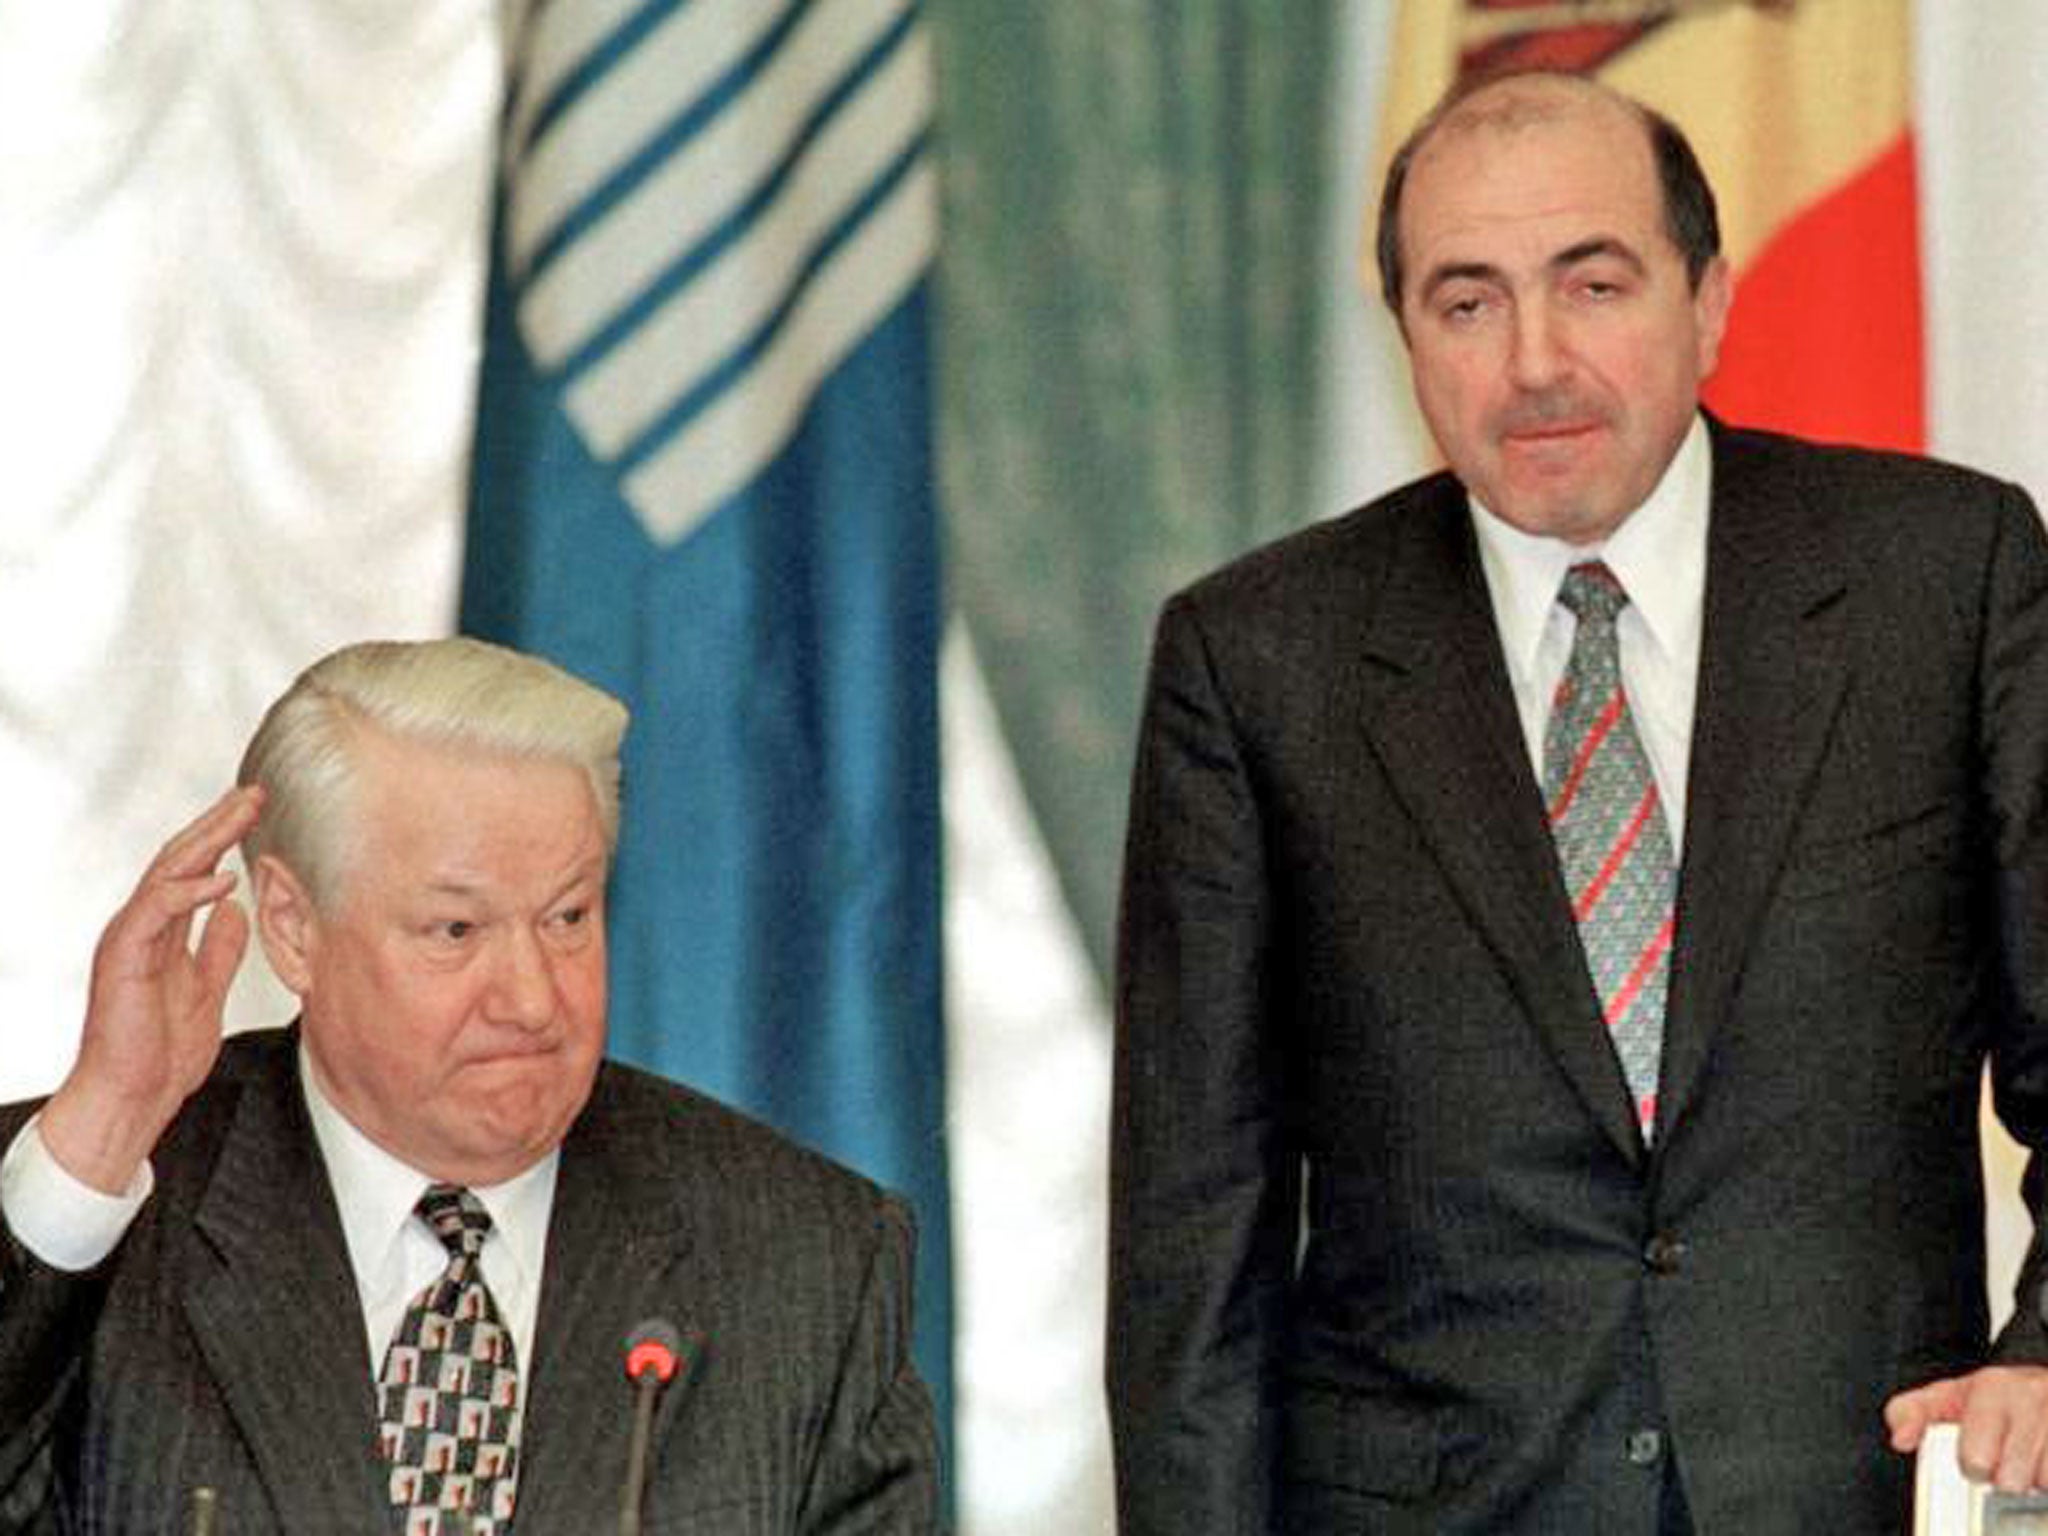 Boris Berezovsky rose to prominence as a key ally of former Russian President Boris Yeltsin, pictured together here in 1998